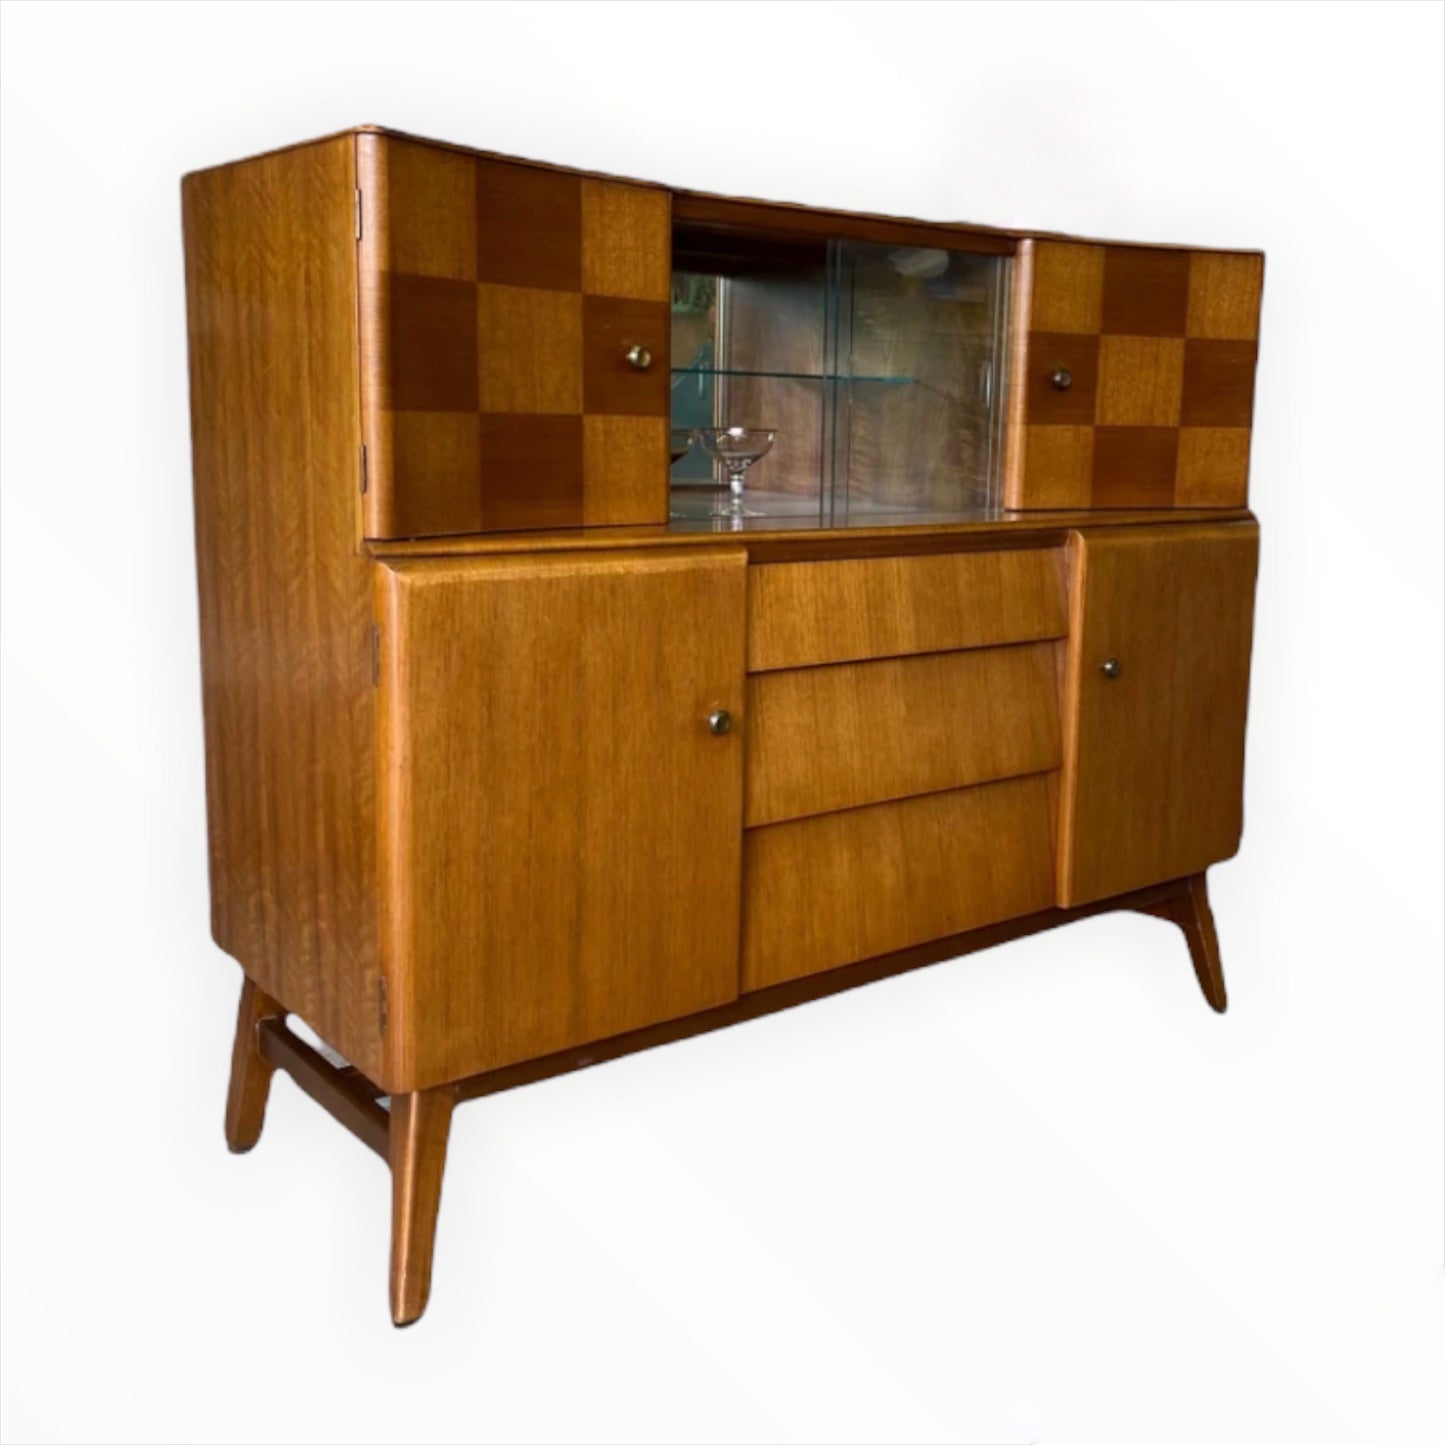 Beautility Cocktail Cabinet Display Cabinet Sideboard - Unique Home Pieces